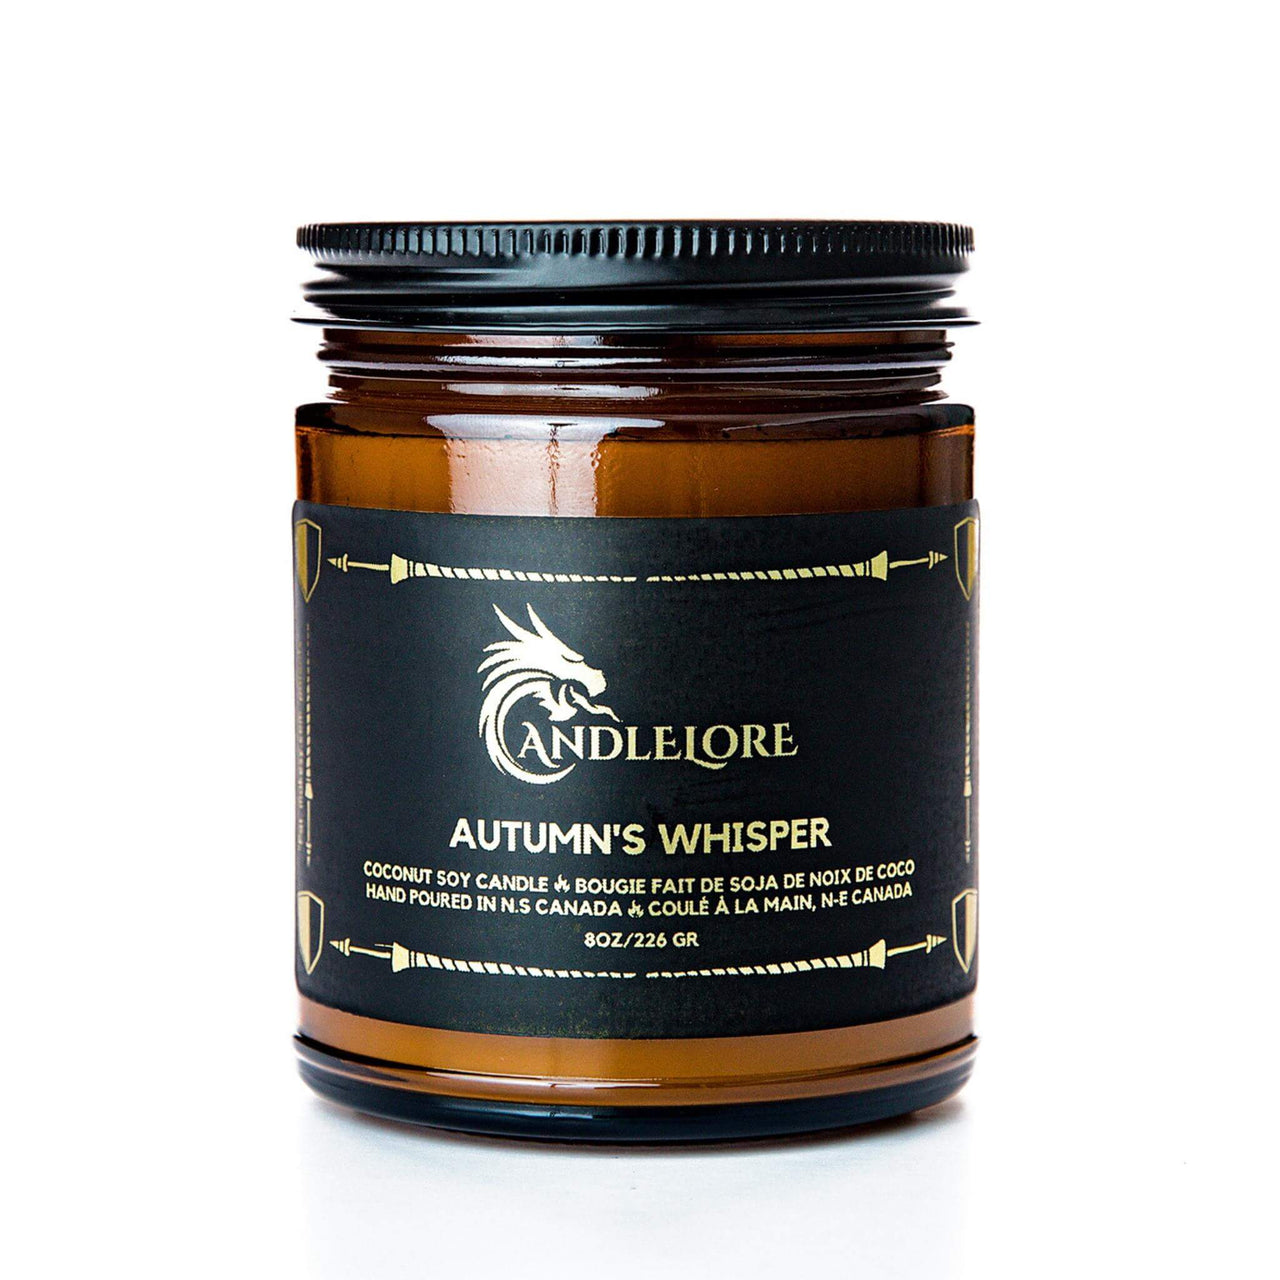 Medium Autumn's Whisper scented candle on a white background